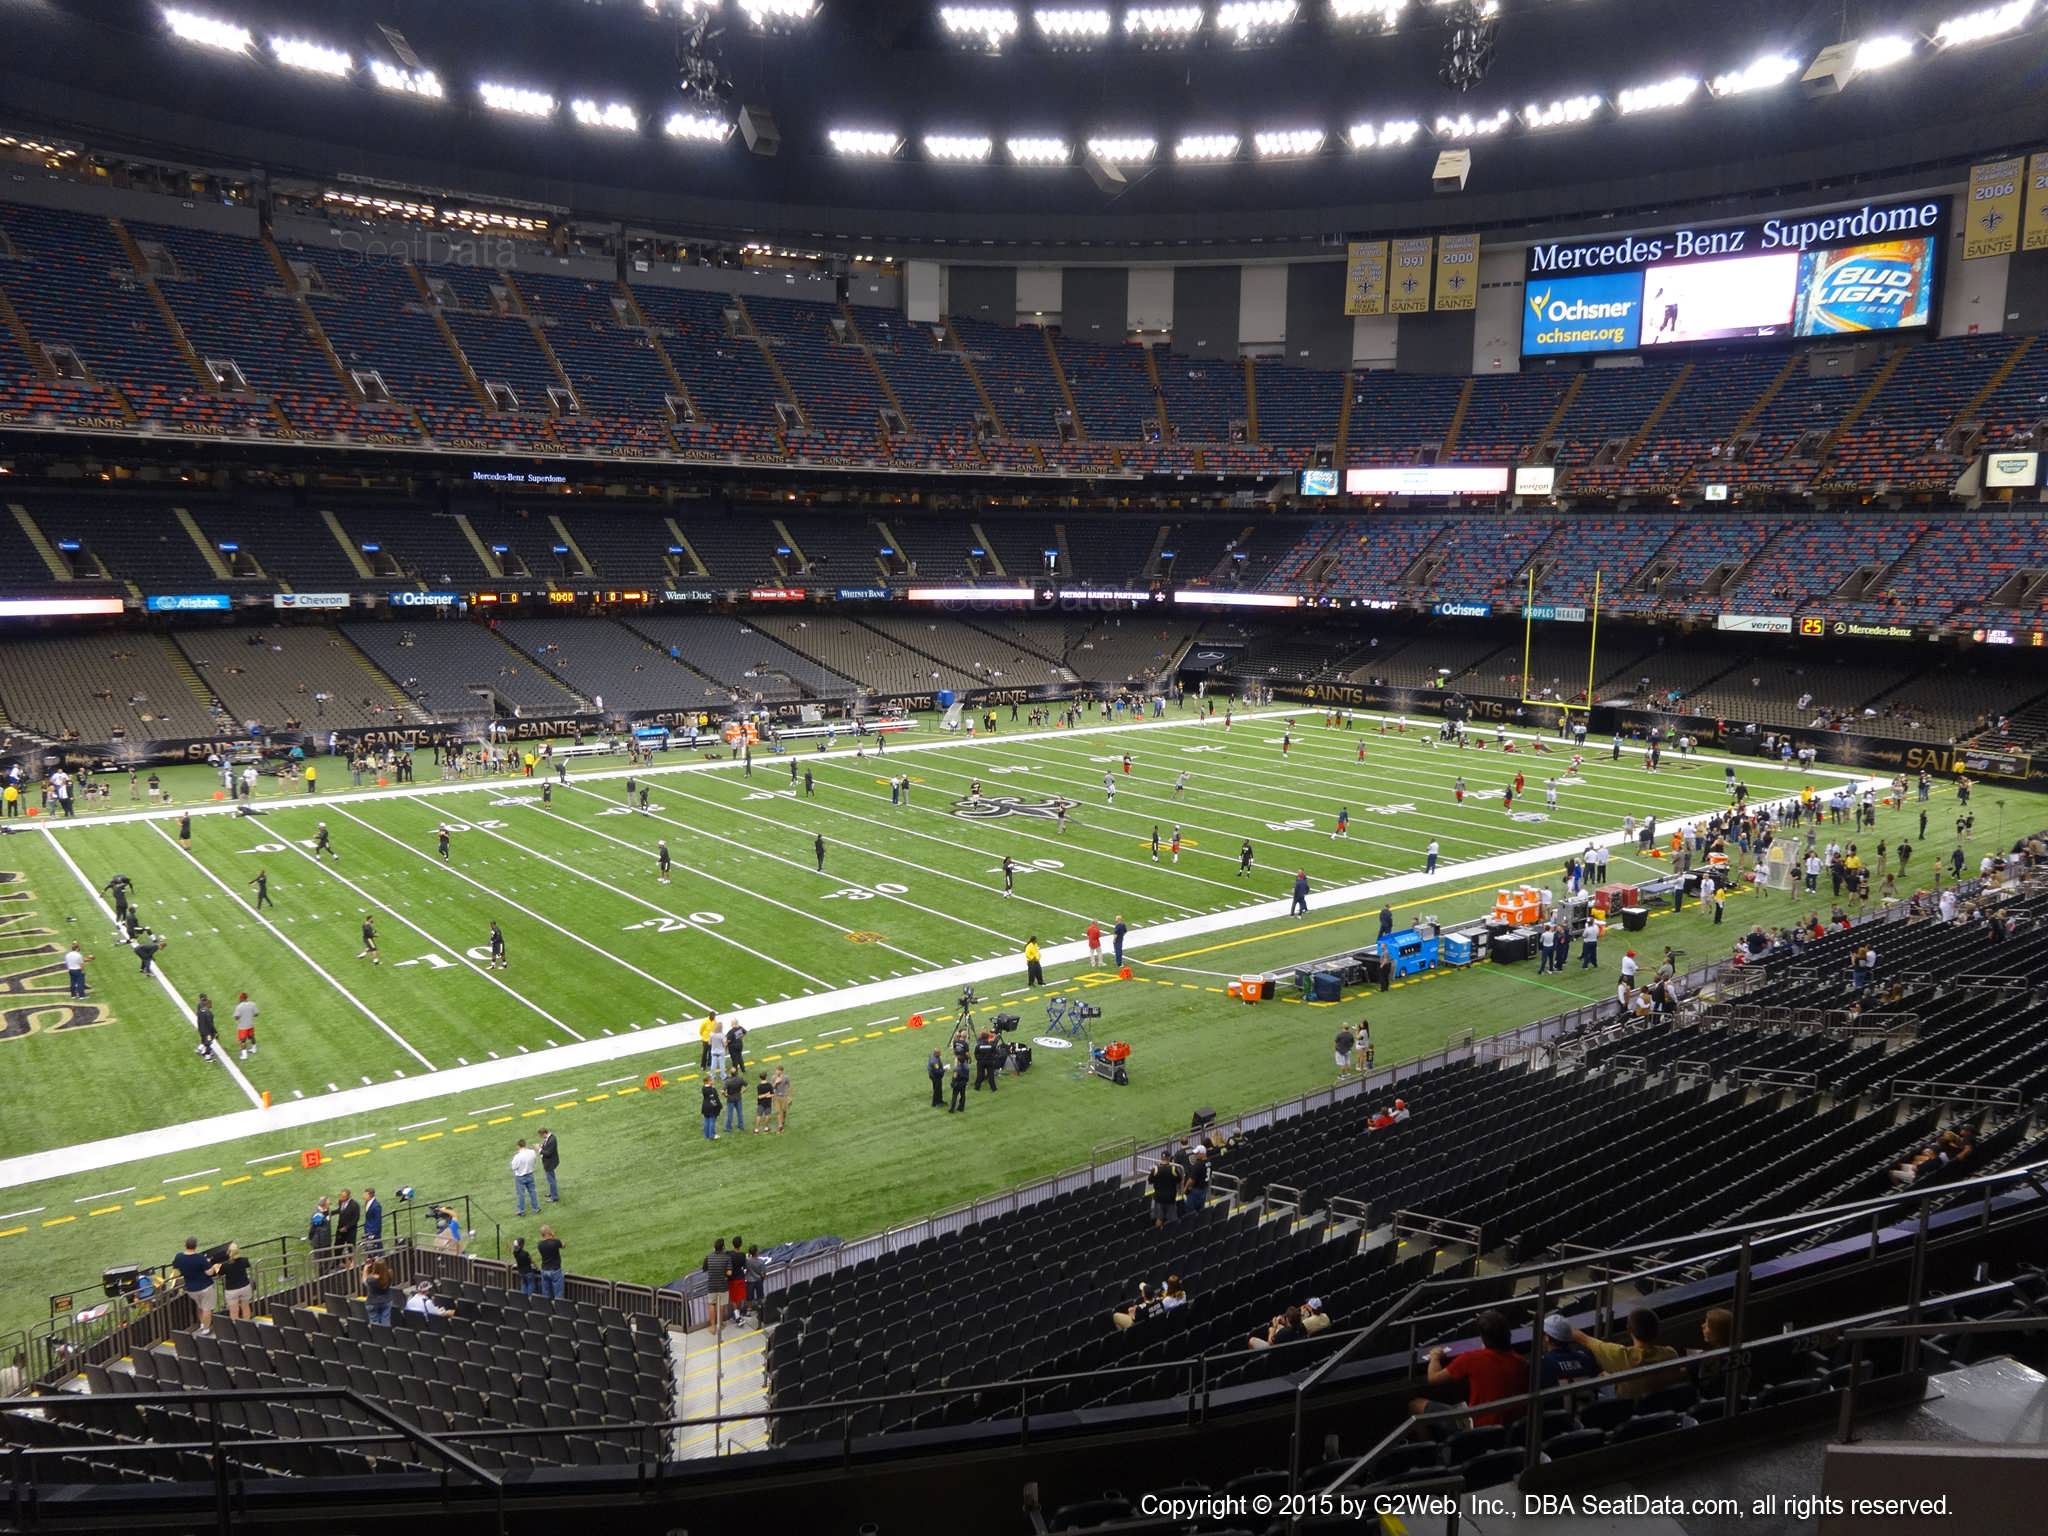 Seat view from section 317 at the Mercedes-Benz Superdome, home of the New Orleans Saints